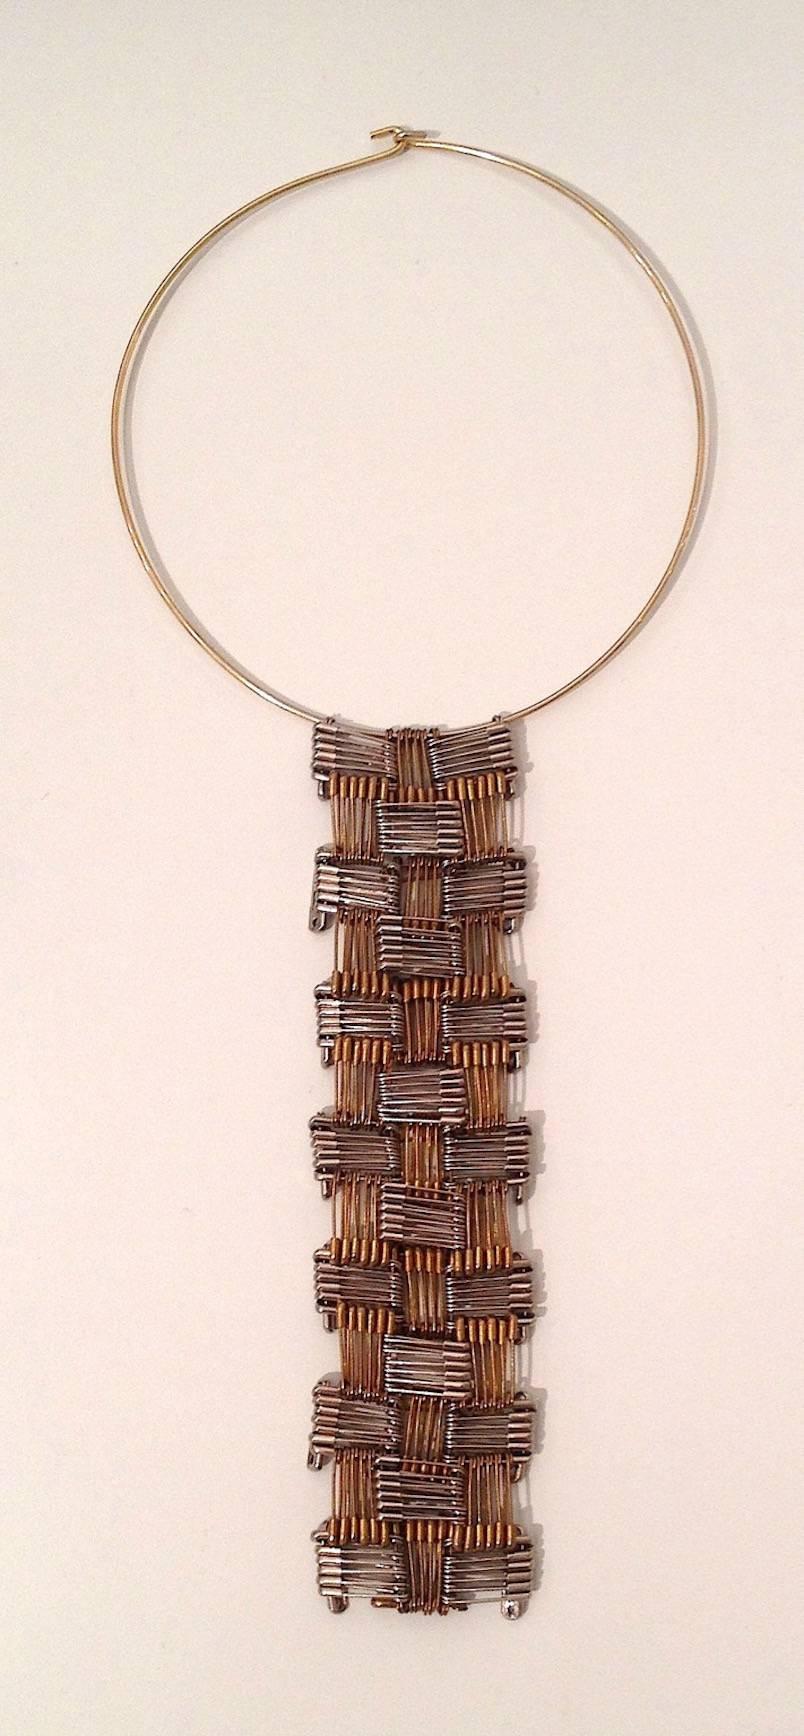 Tie Necklace, silver, brass, and nickel safety pin wearable art - Art by Tamiko Kawata